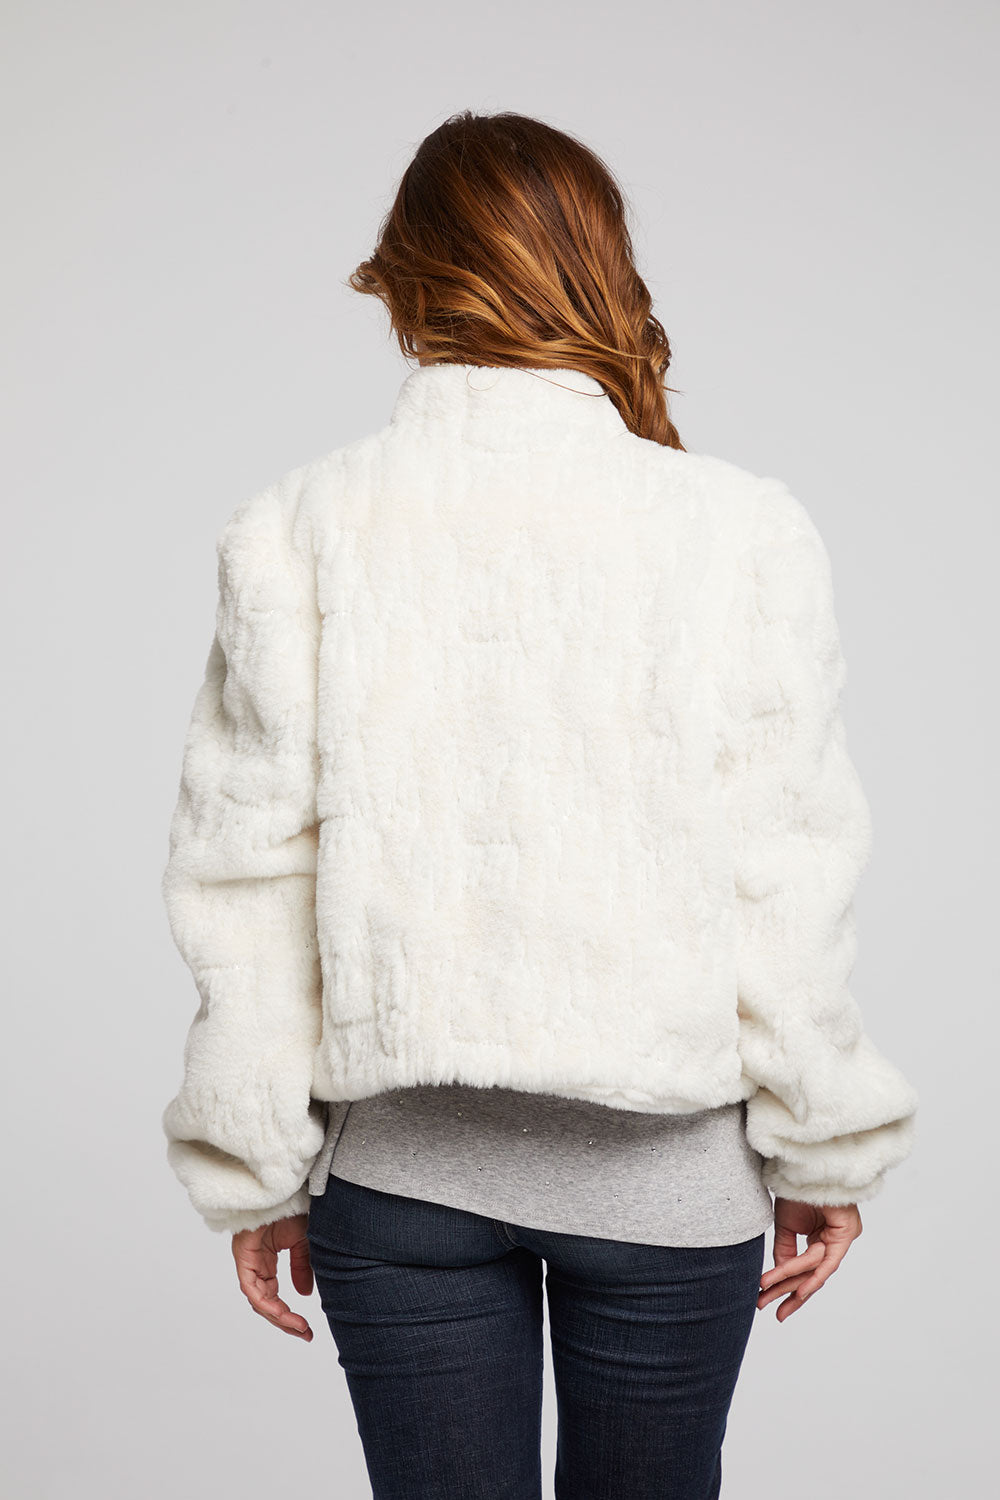 chaser-starry-white-faux-fur-jacket-06